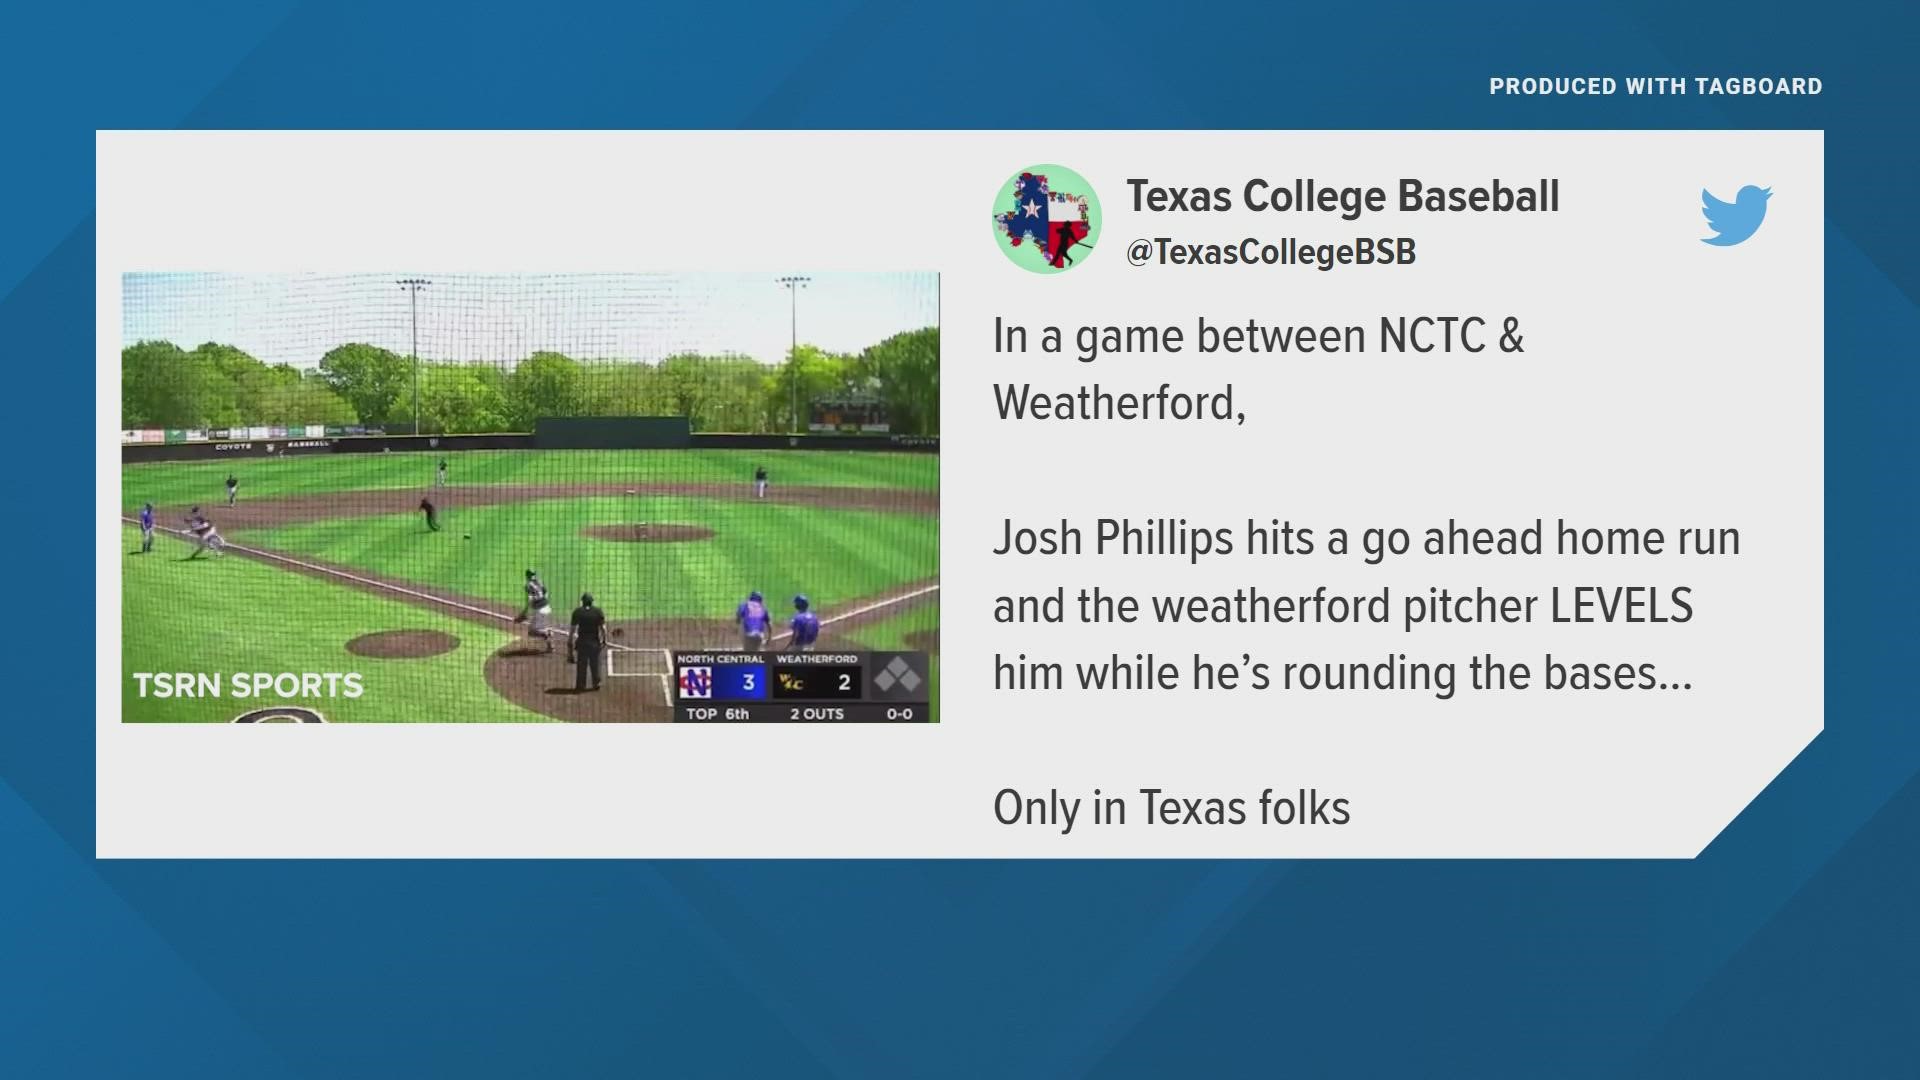 "I've never seen a pitcher attack a defenseless runner," Kel Bordwine said. He runs the Twitter account Texas College Baseball and posted the now viral video.